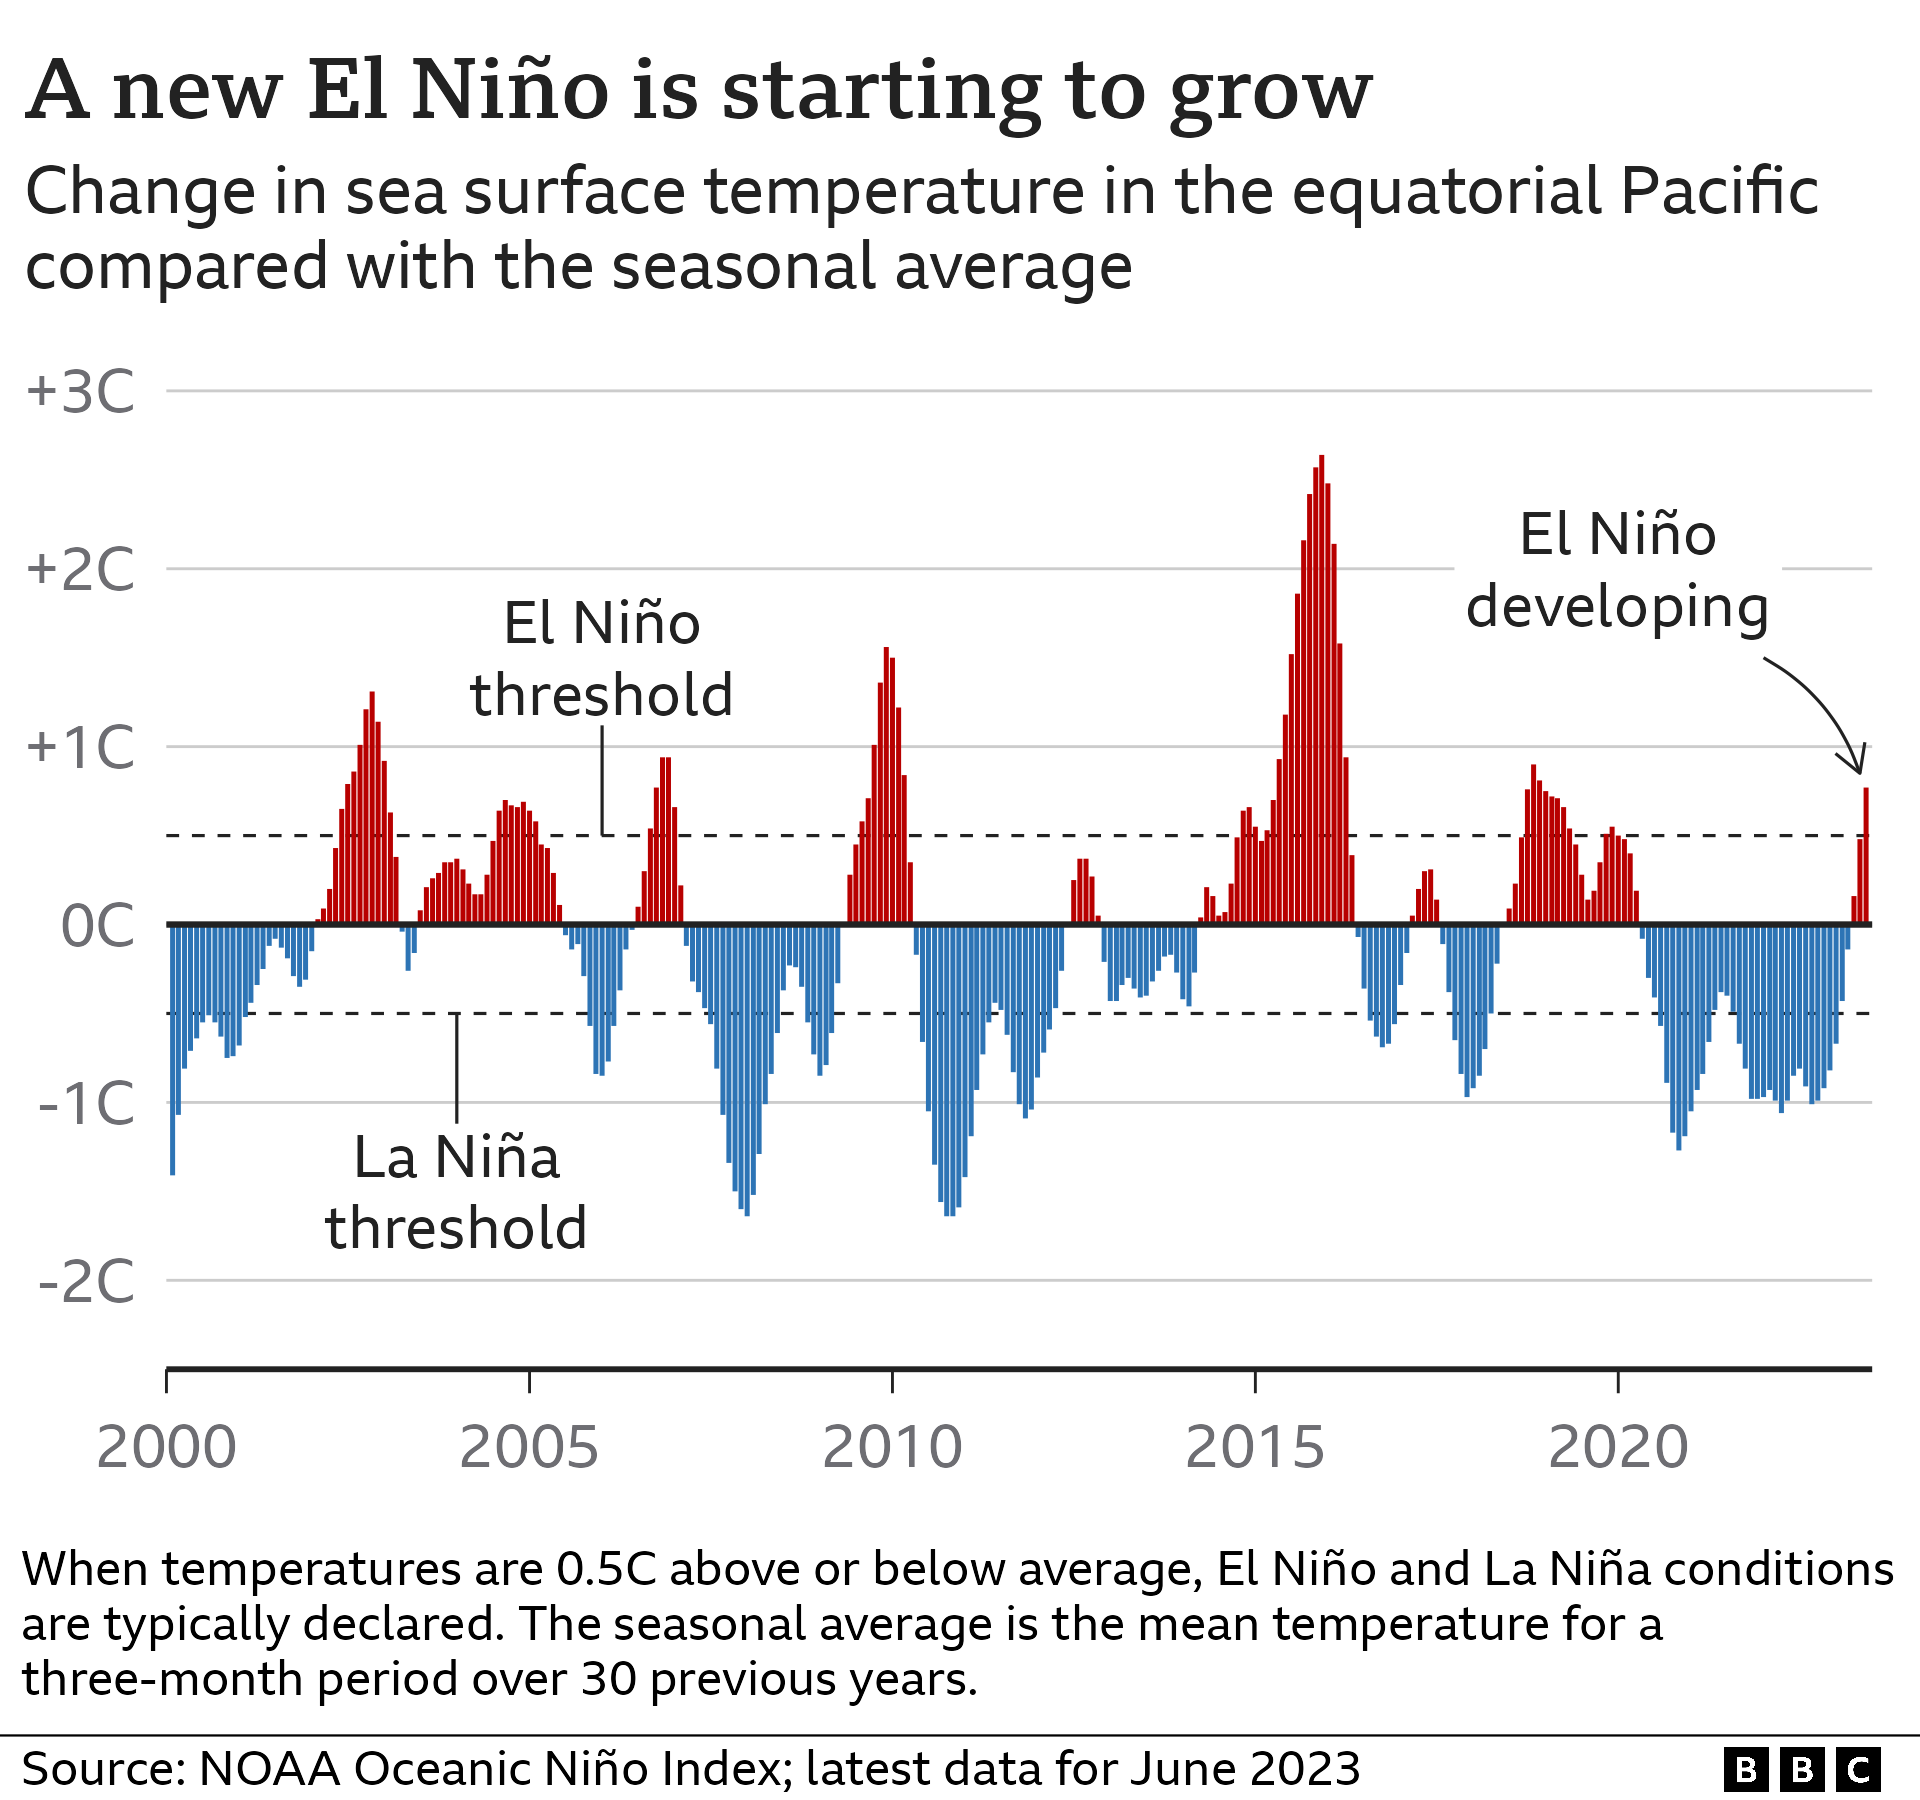 Chart showing average seasonal sea surface temperatures compared with the average. When temperatures are 0.5C above or below the average, they are considered to be El Nino or La Nina conditions. May 2023 shows that El Nino conditions are beginning